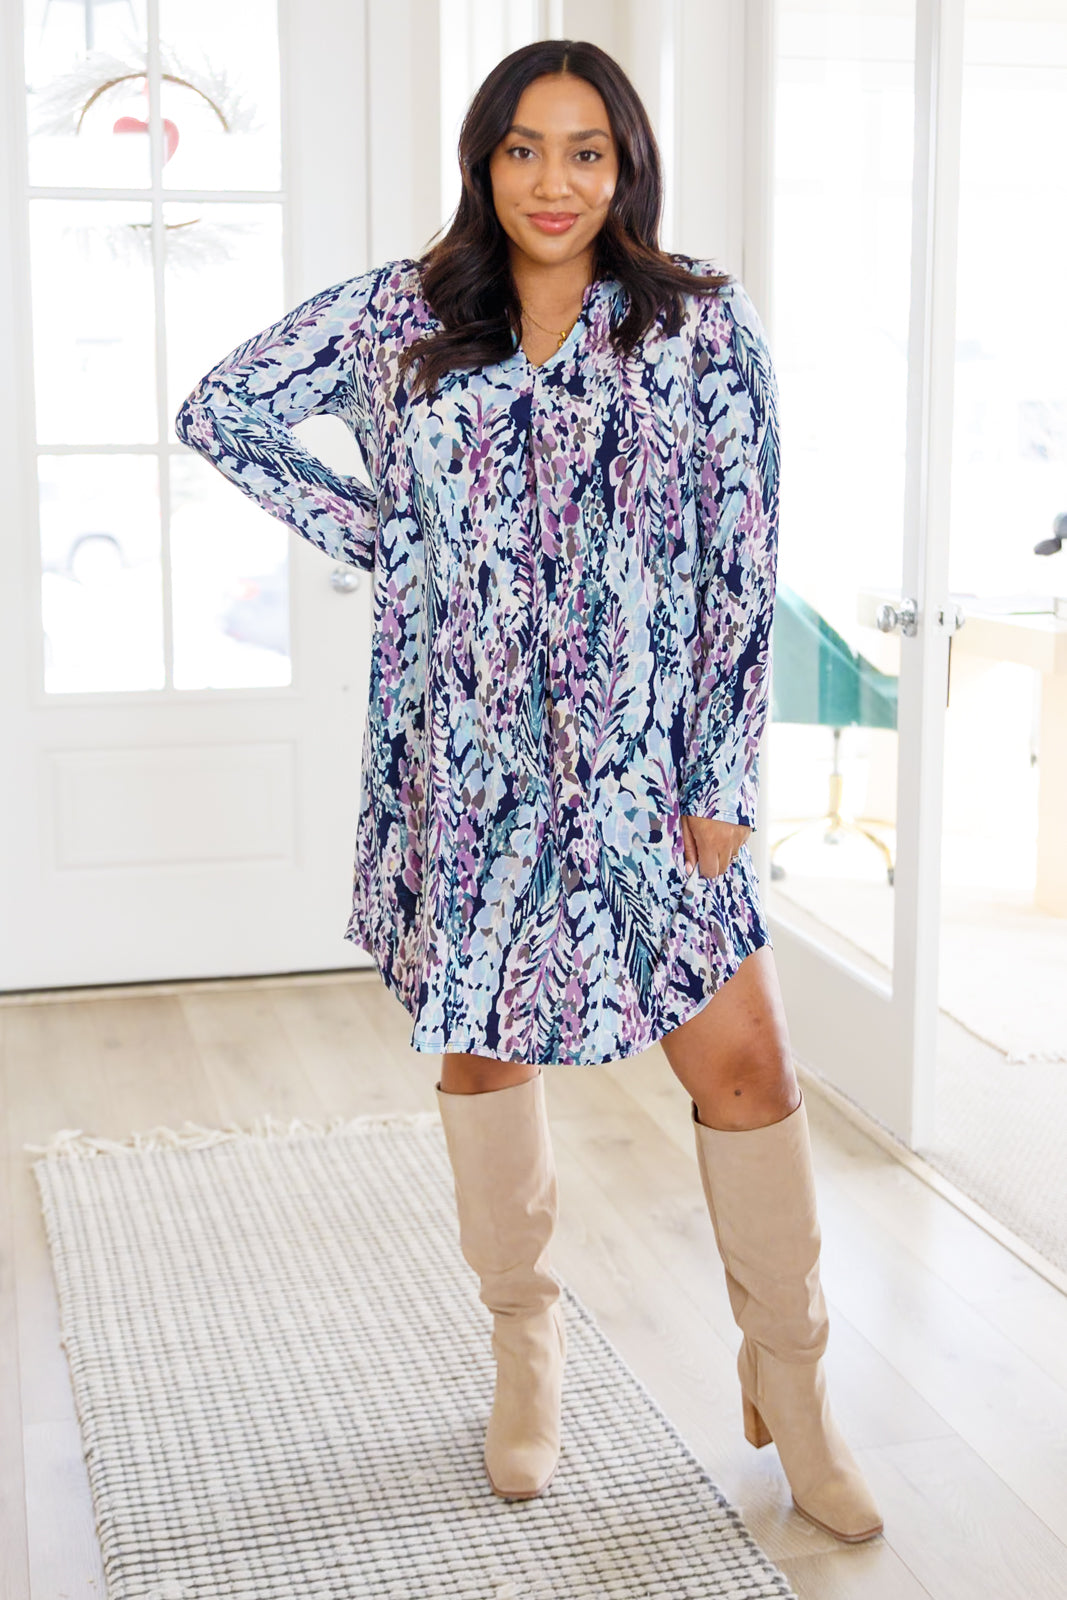 Generally Speaking V-Neck Dress in Navy Floral-Dresses-Ave Shops-Happy Campers Boutique, Women's Fashion and More in Plainwell, MI